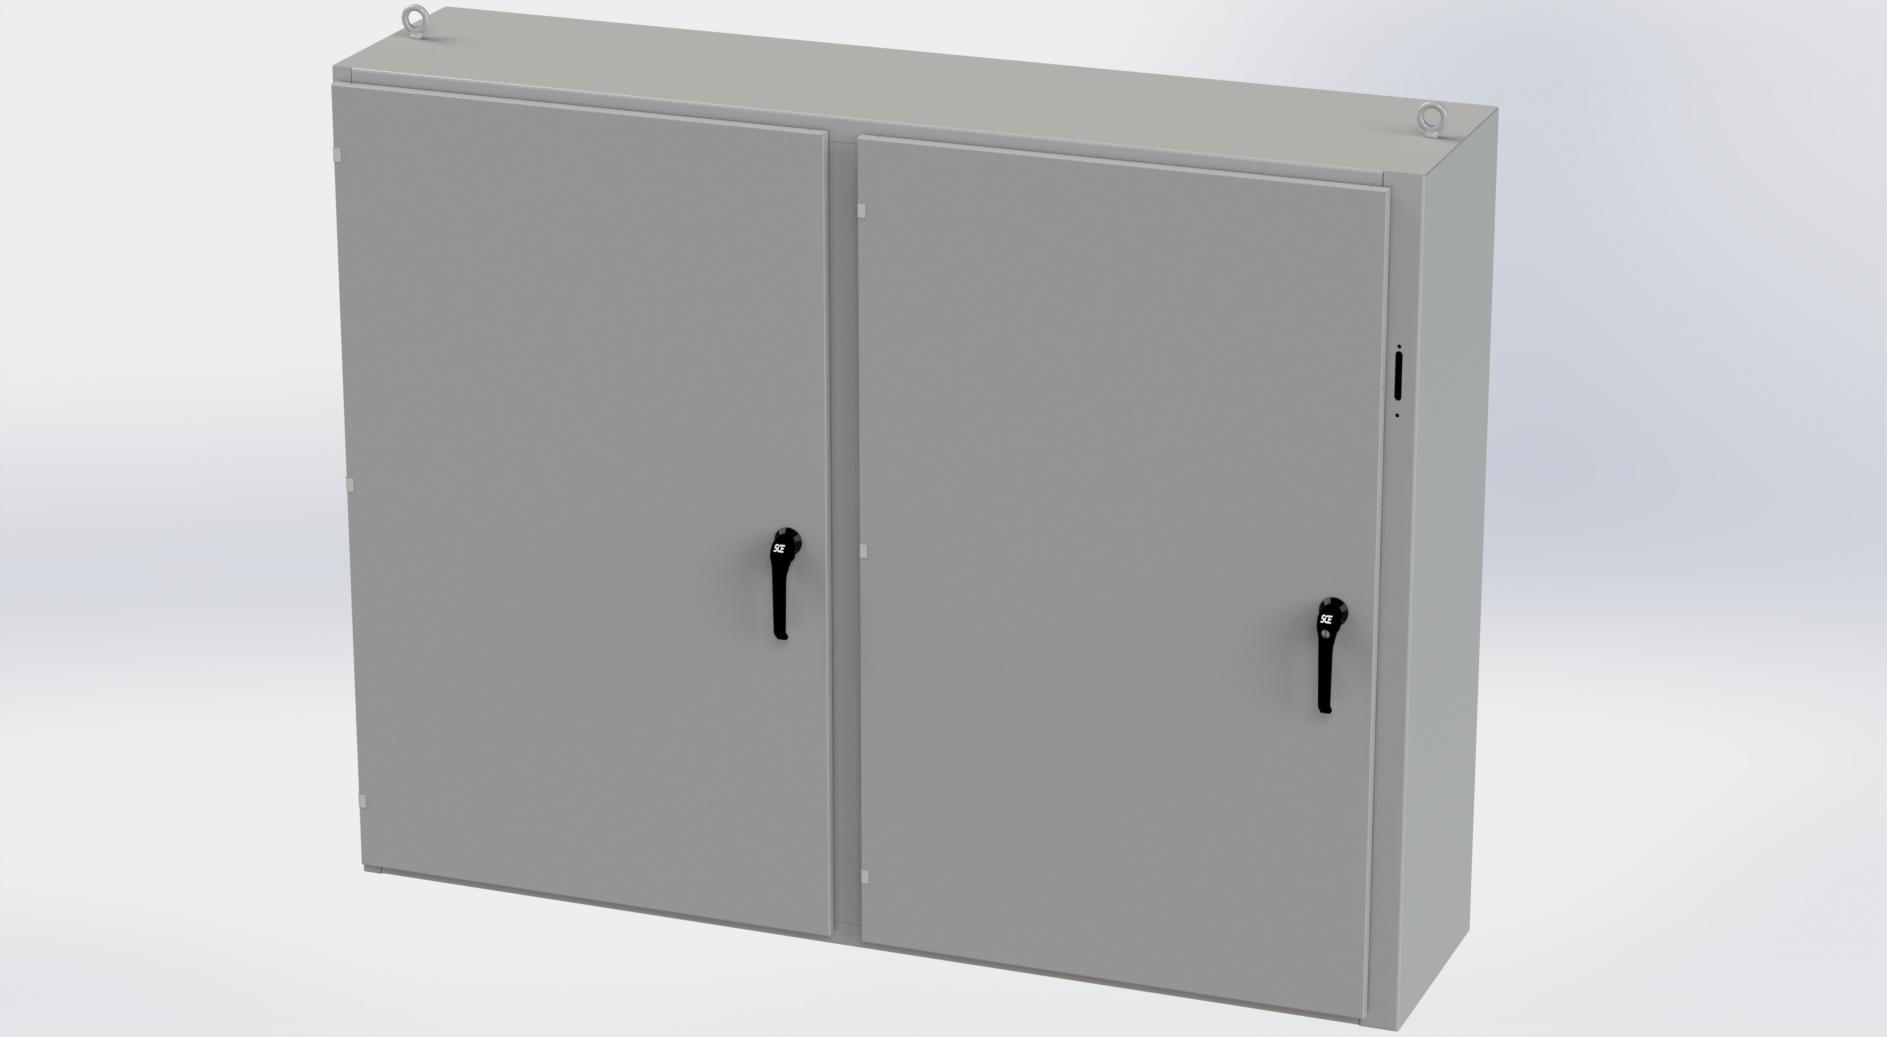 Saginaw Control SCE-60X2D7818 2DR Disc. Enclosure, Height:60.00", Width:77.75", Depth:18.00", ANSI-61 gray powder coating inside and out. Optional sub-panels are powder coated white.